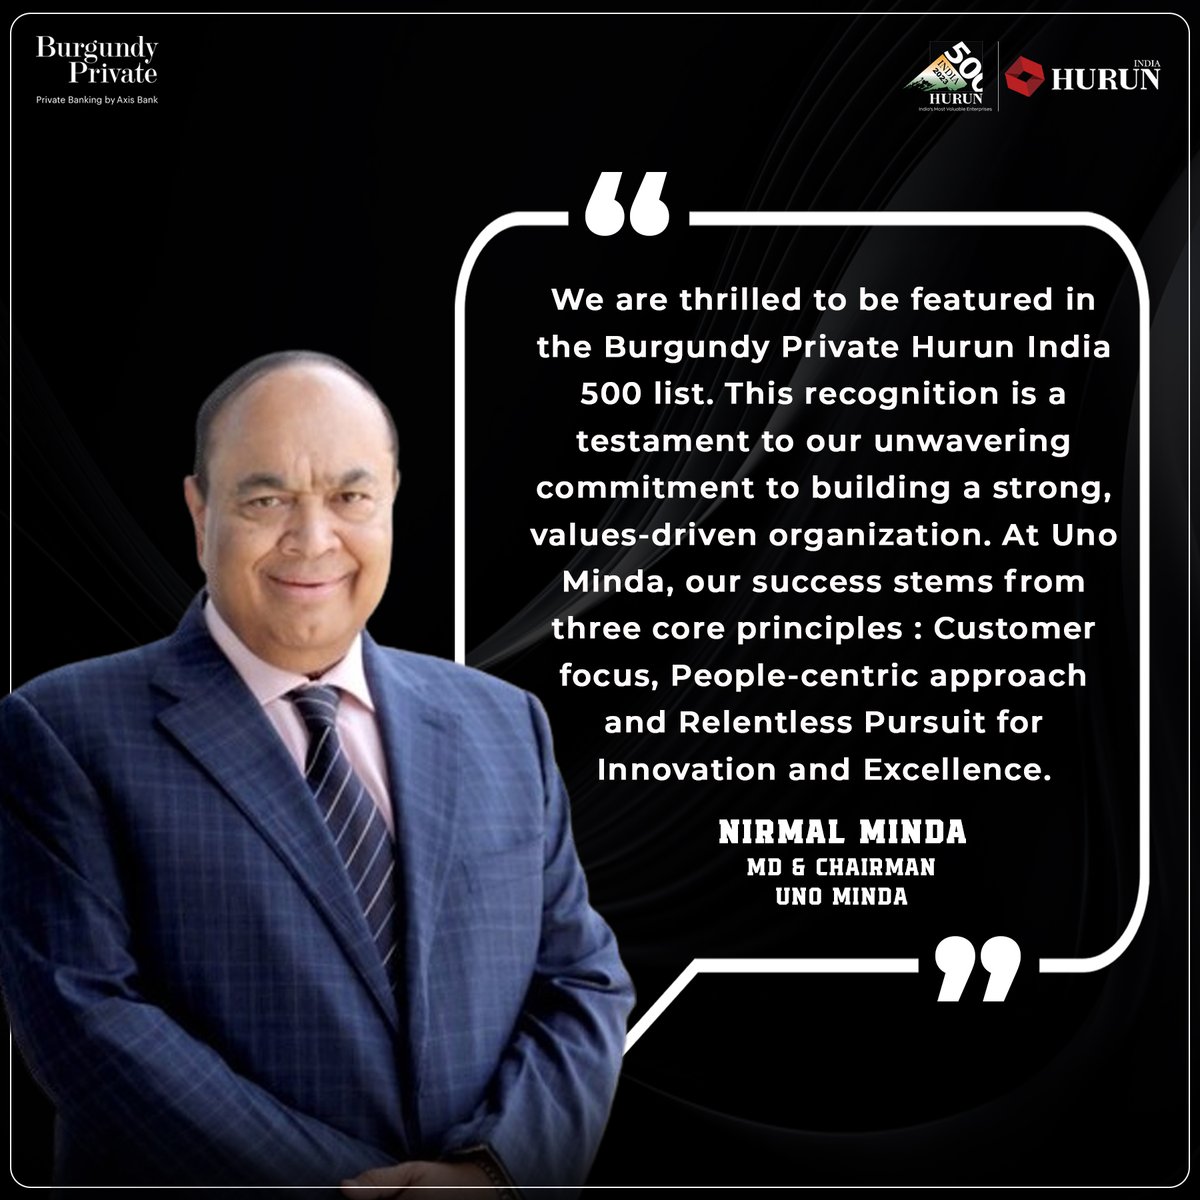 Nirmal Minda, Chairman & Managing Director of UNO Minda, shares his thoughts about being featured among the 2023 Burgundy Private Hurun India 500.
To access the report follow this link: hurunindia.com/blog/2023-burg…

#HurunIndia500 #HurunIndia #BurgundyPrivate #AxisBank